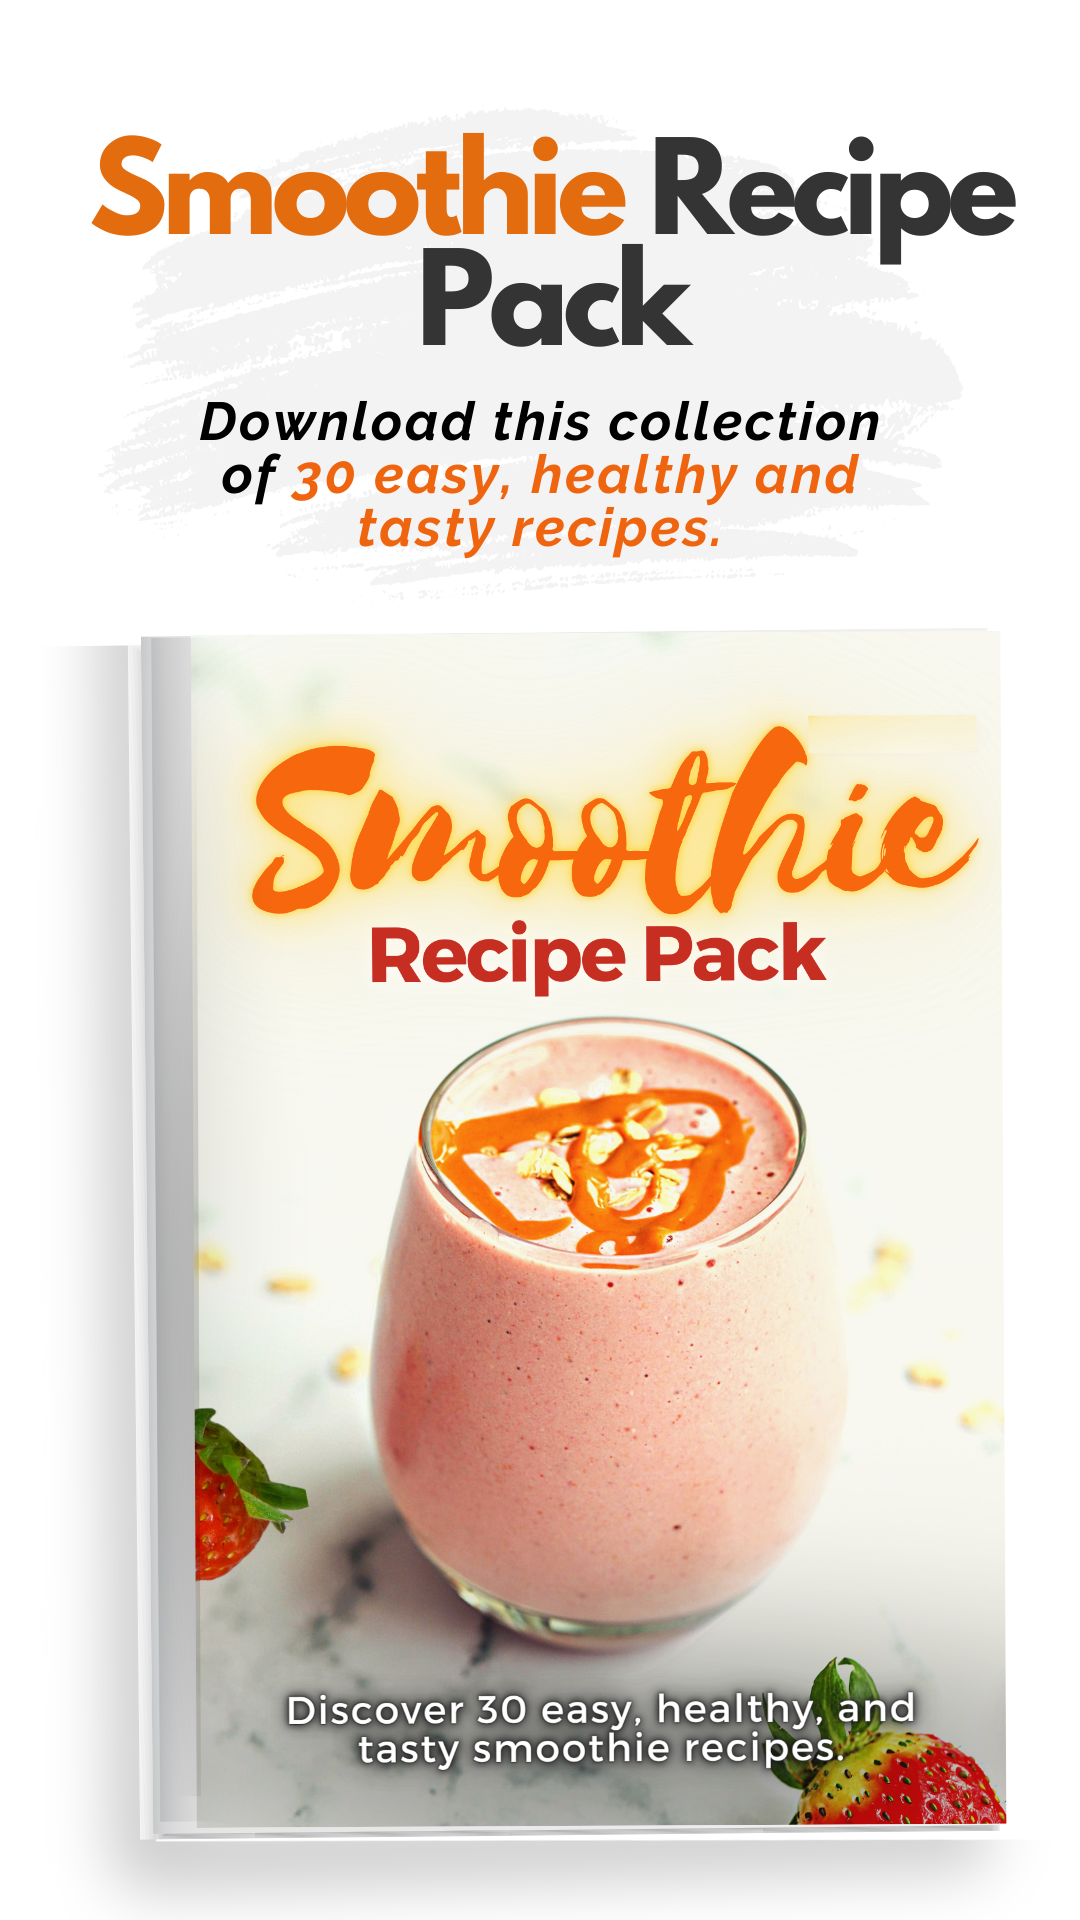 smoothie pack recipes 